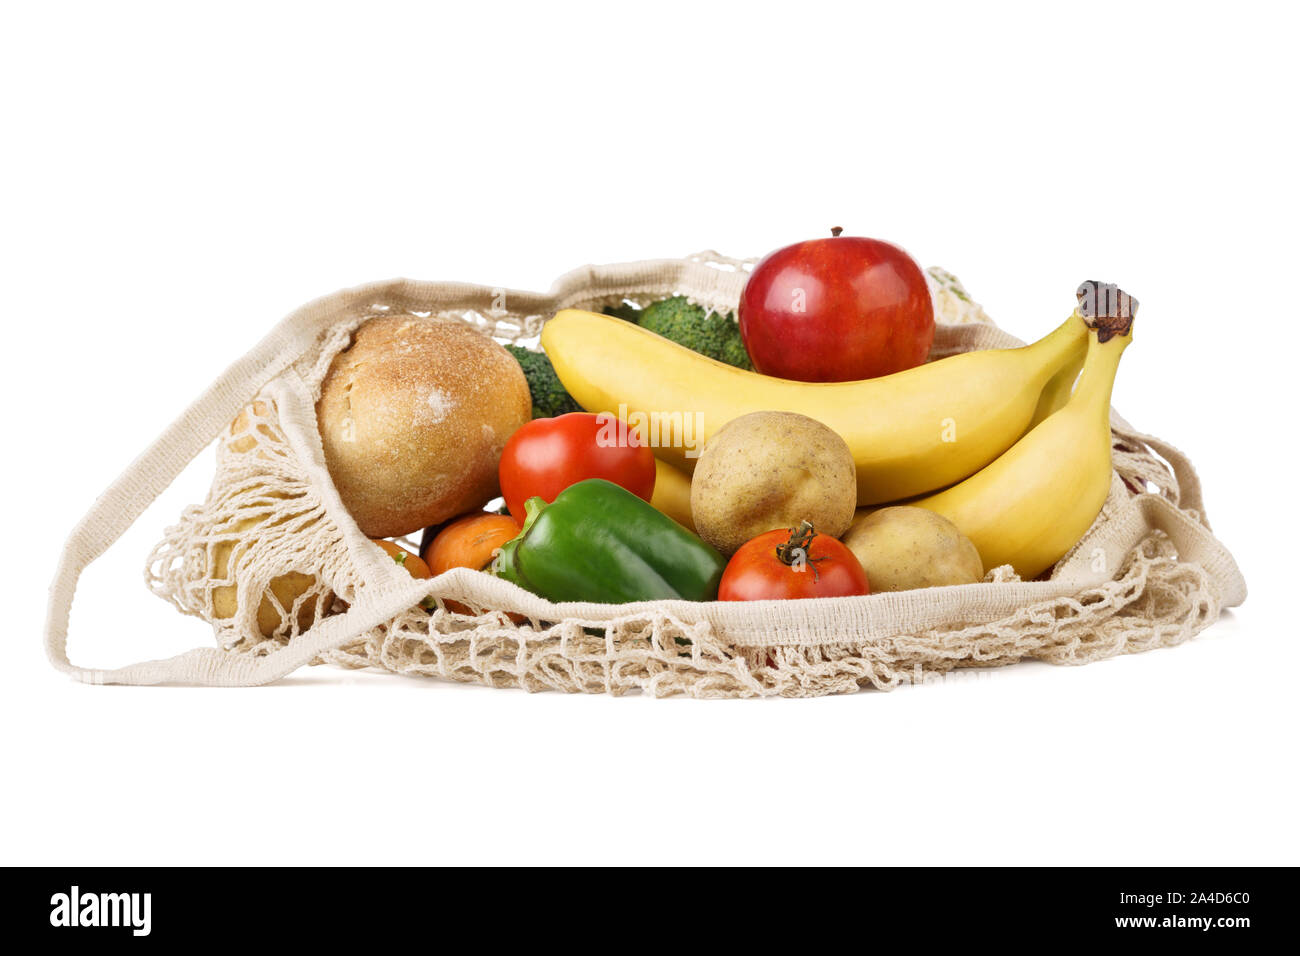 Reusable eco-friendly strip shopping bag full of various food - fruits, vegetables and bread. Isolated on white background. Stock Photo